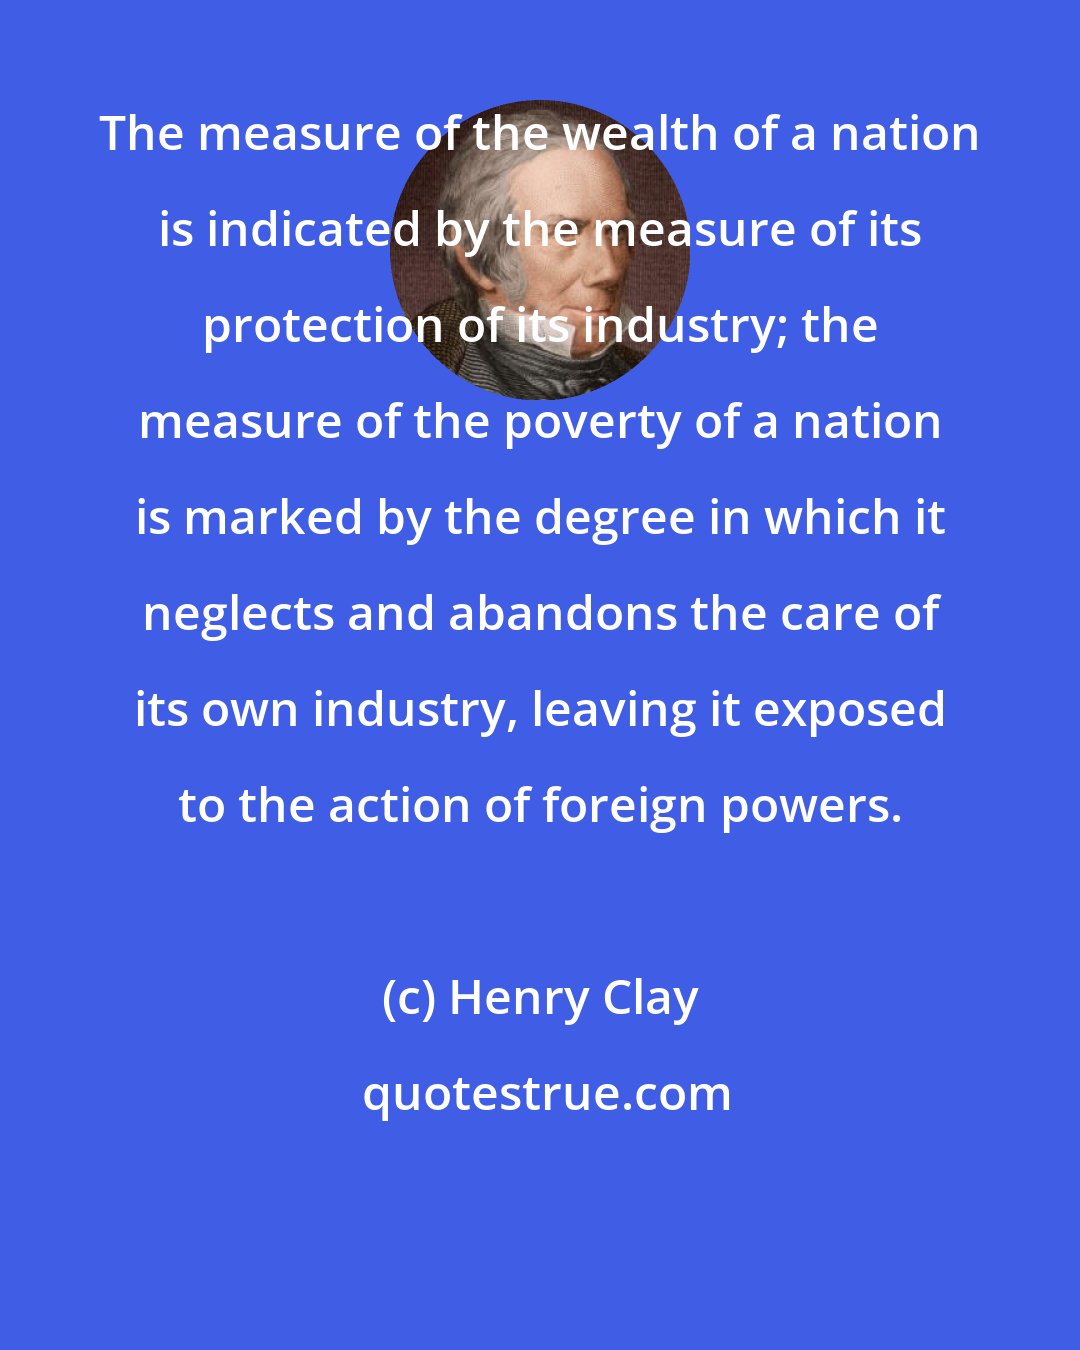 Henry Clay: The measure of the wealth of a nation is indicated by the measure of its protection of its industry; the measure of the poverty of a nation is marked by the degree in which it neglects and abandons the care of its own industry, leaving it exposed to the action of foreign powers.